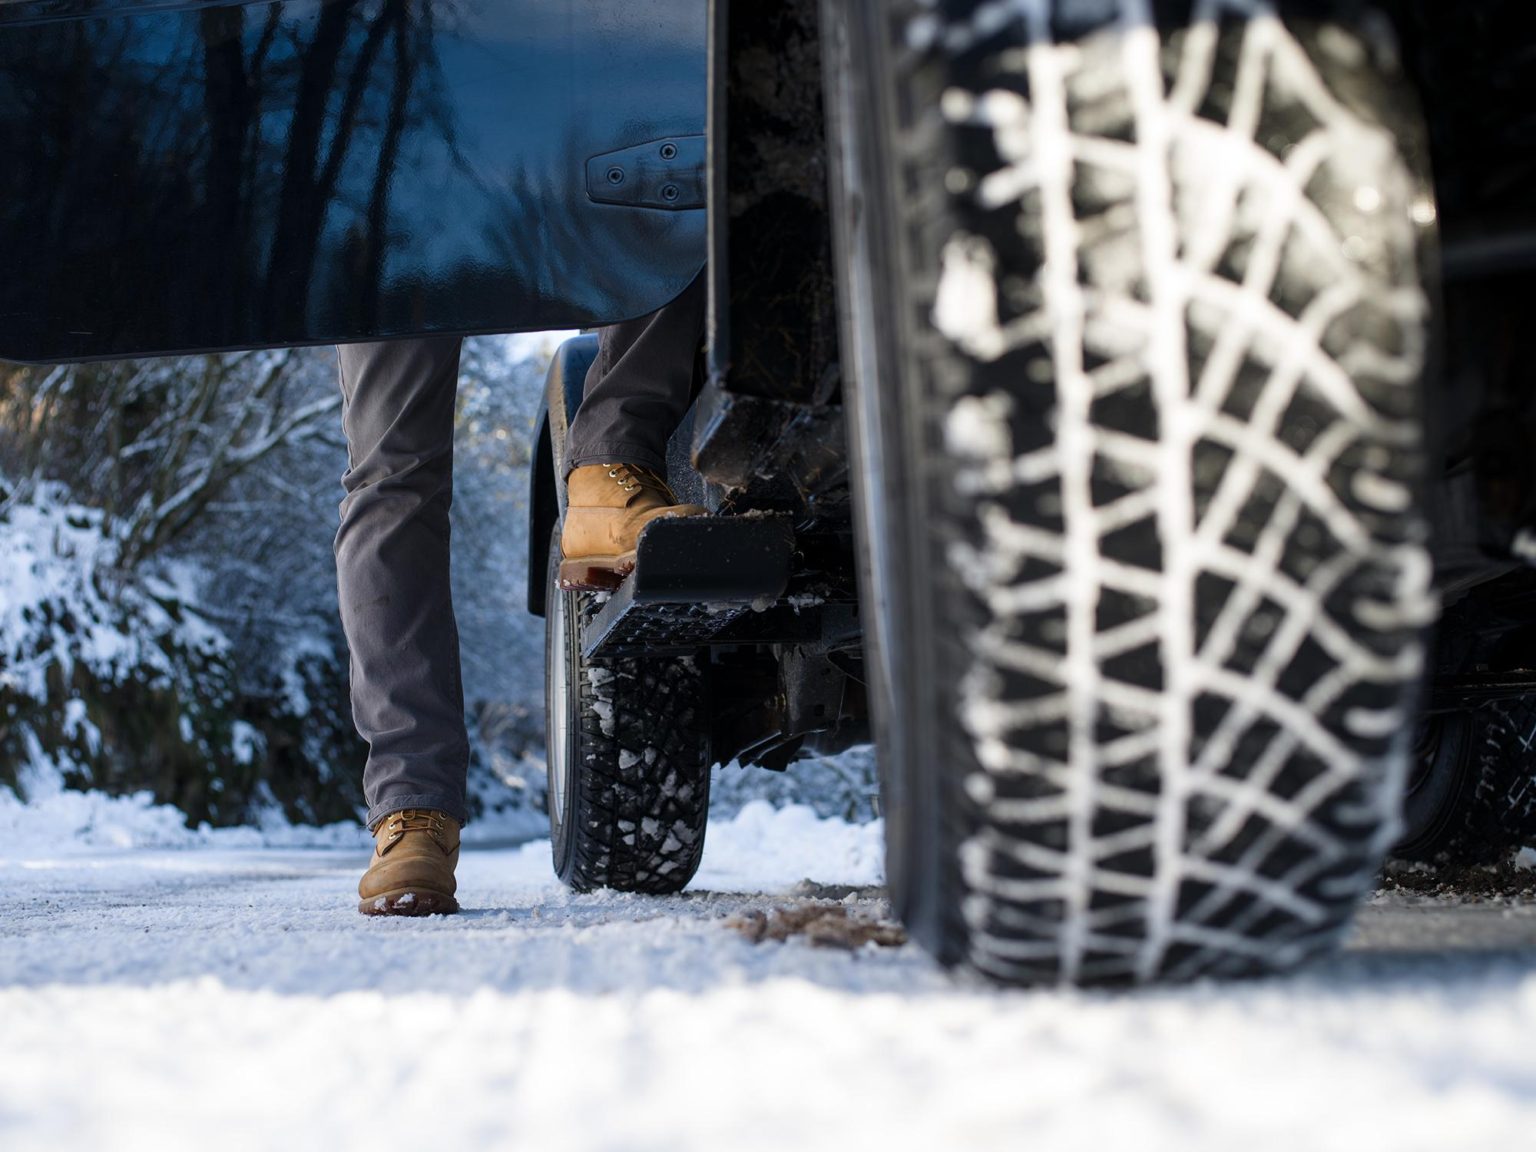 If you live where it snows, getting snow tires for your car may help keep you safe this winter.